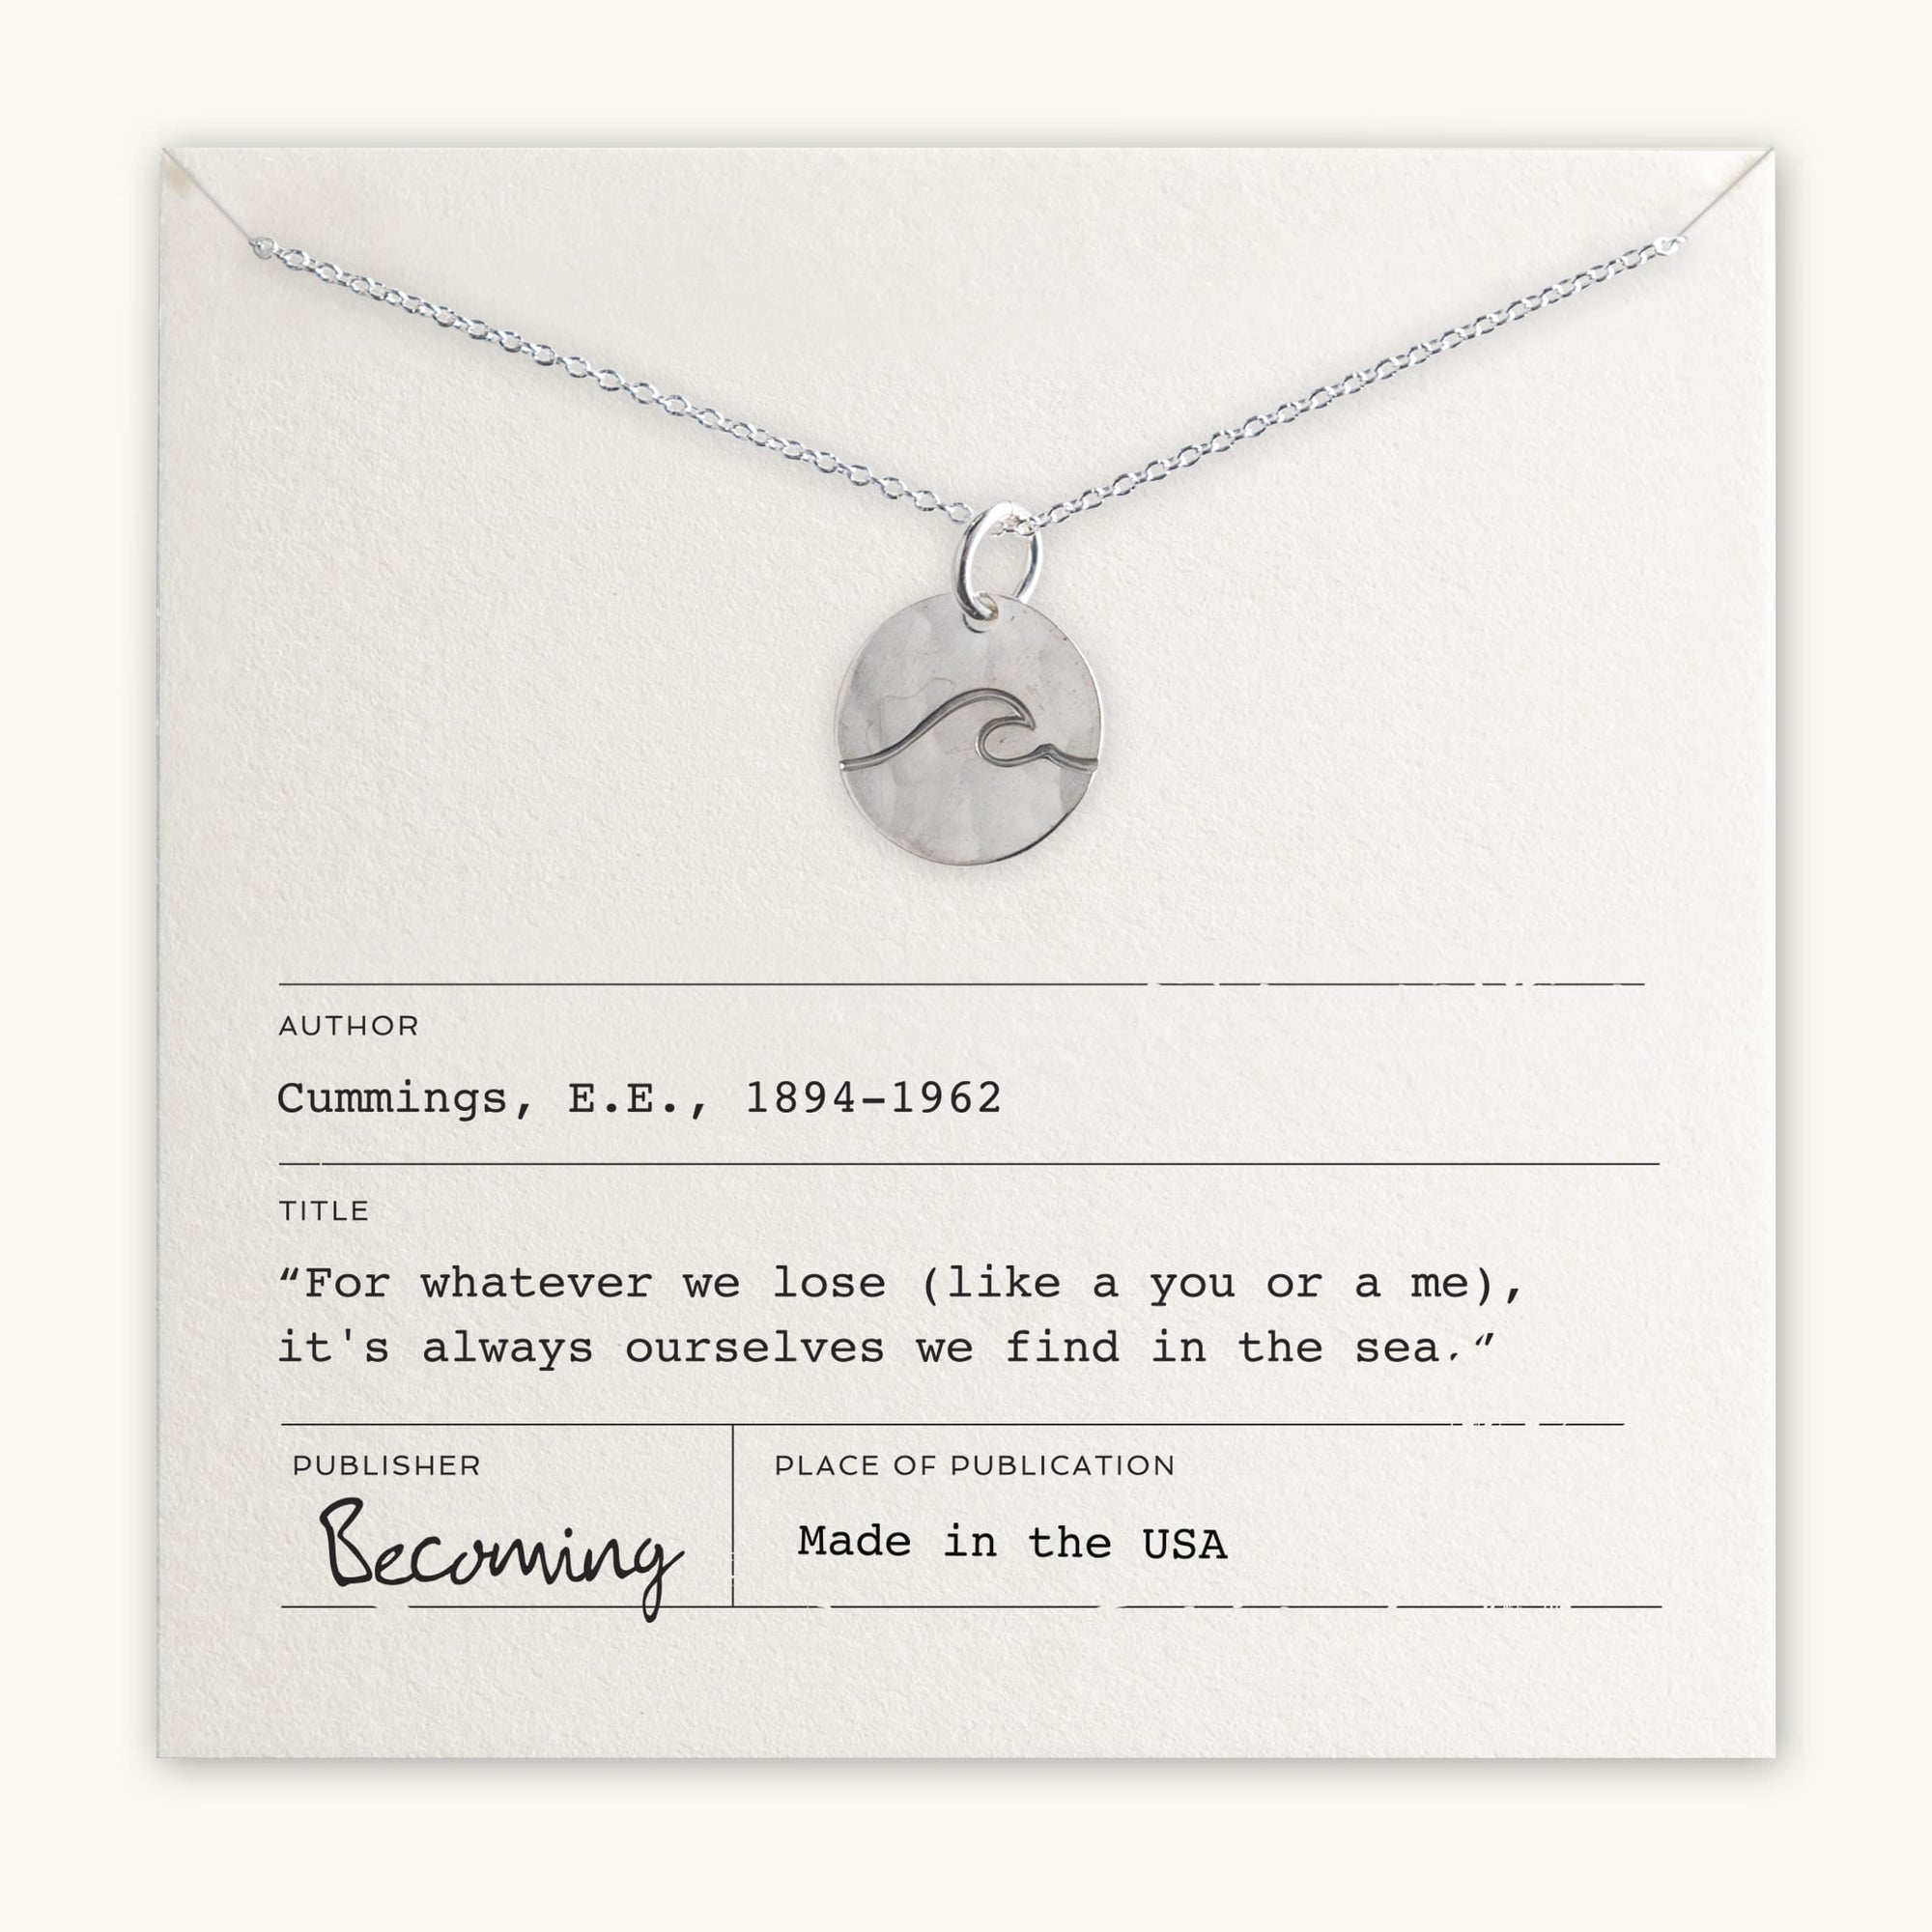 Silver Wave Round Charm Necklace by Becoming Jewelry displayed on a card featuring an inspirational quote by e.e. cummings and the word &quot;becoming&quot; at the bottom, indicating the piece&#39;s theme.